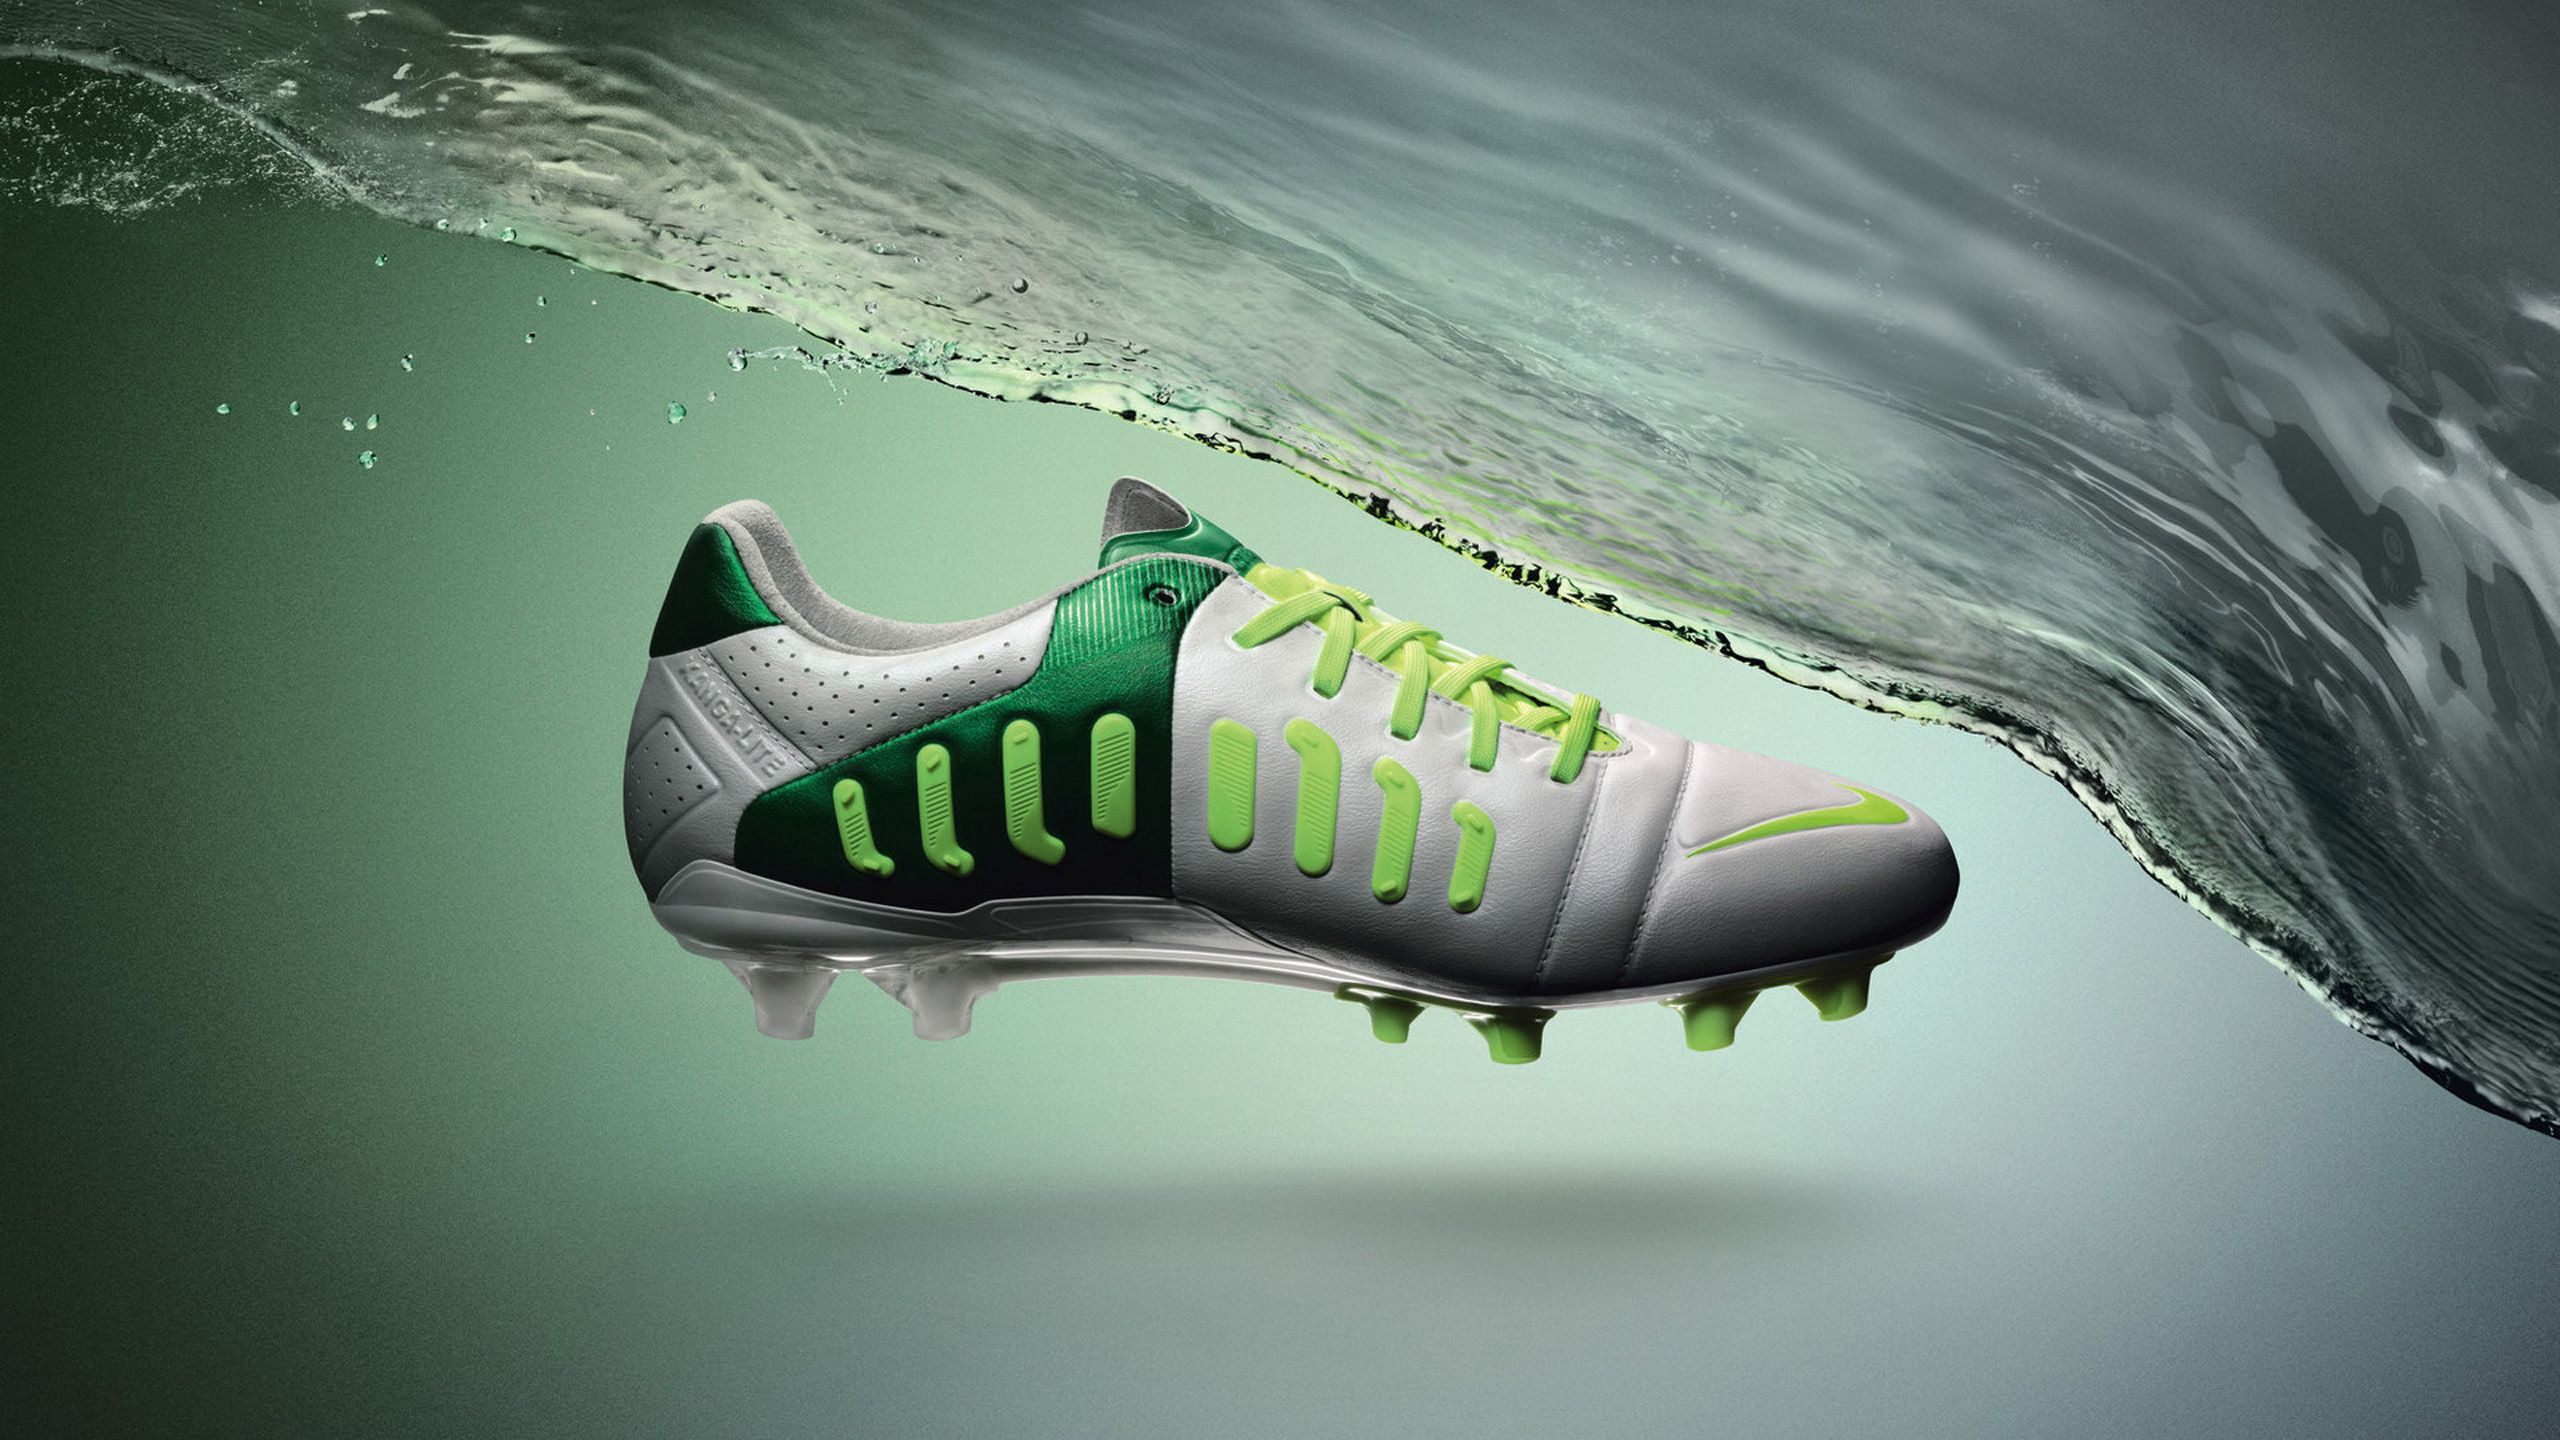 2560x1440 Soccer Shoes Wallpapers